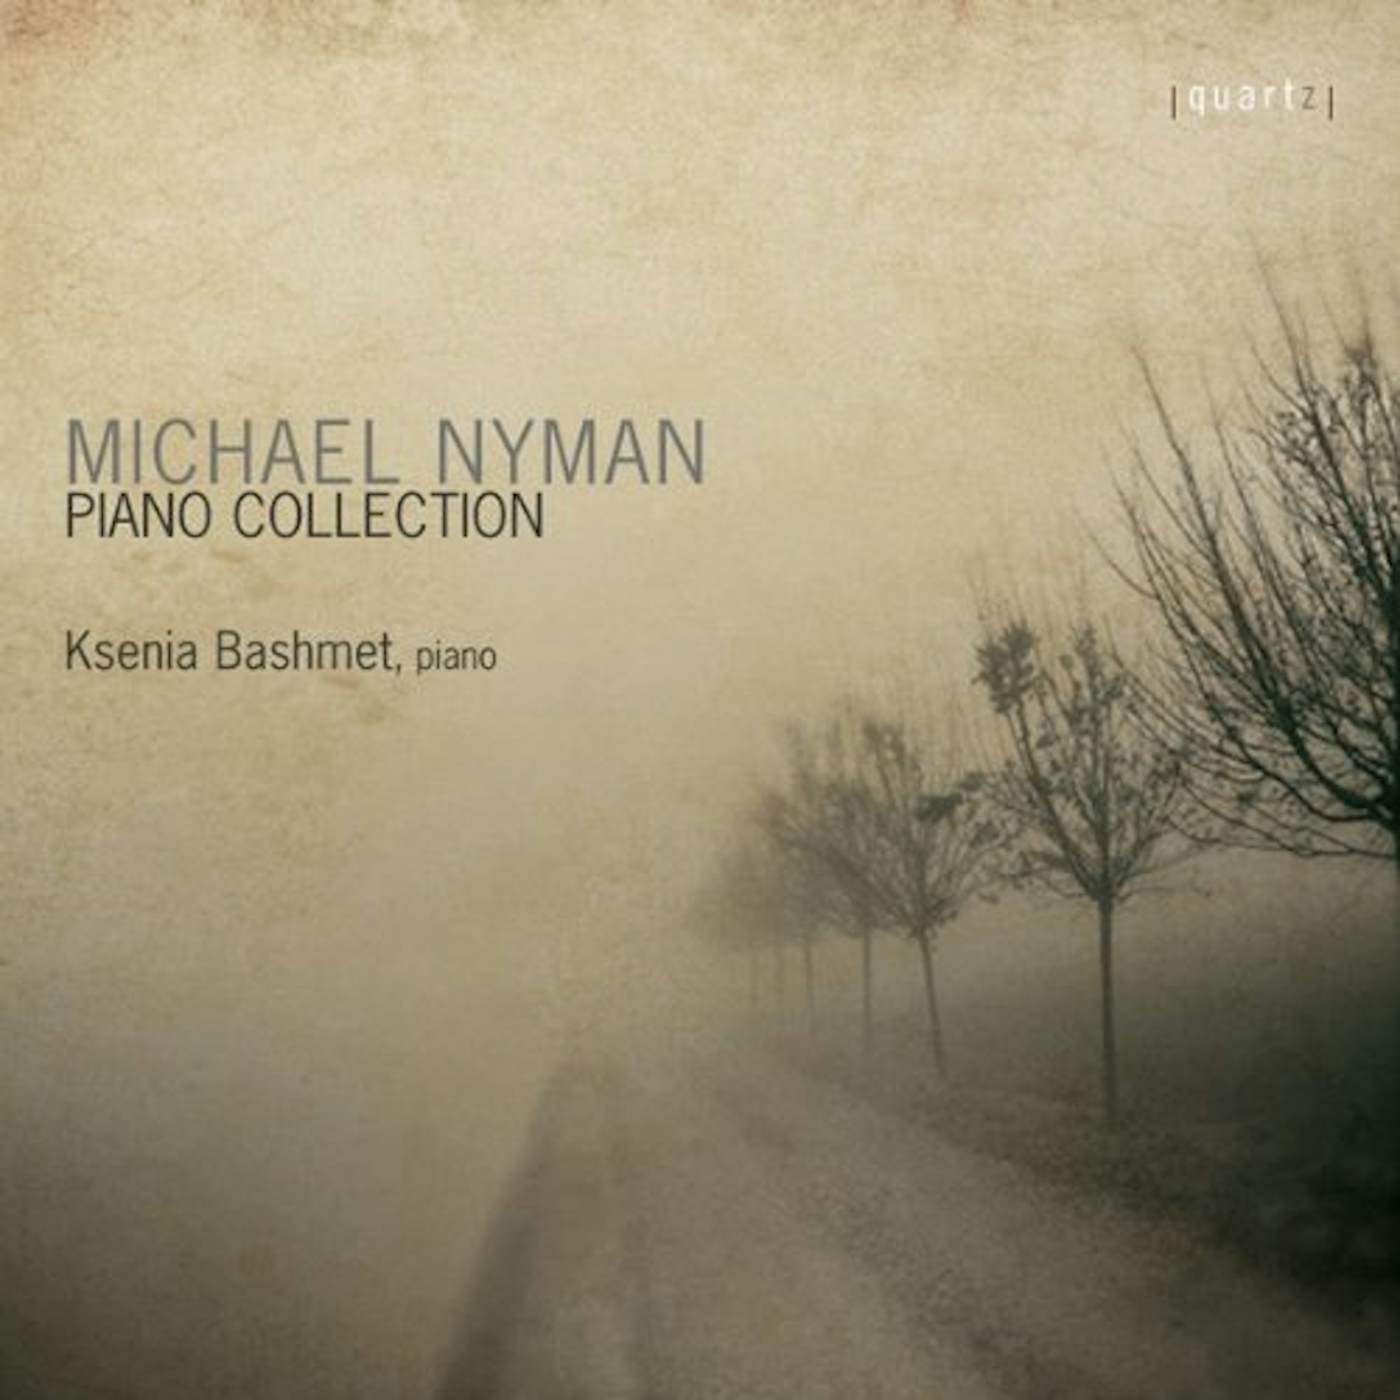 Michael Nyman PIANO COLLECTION CD